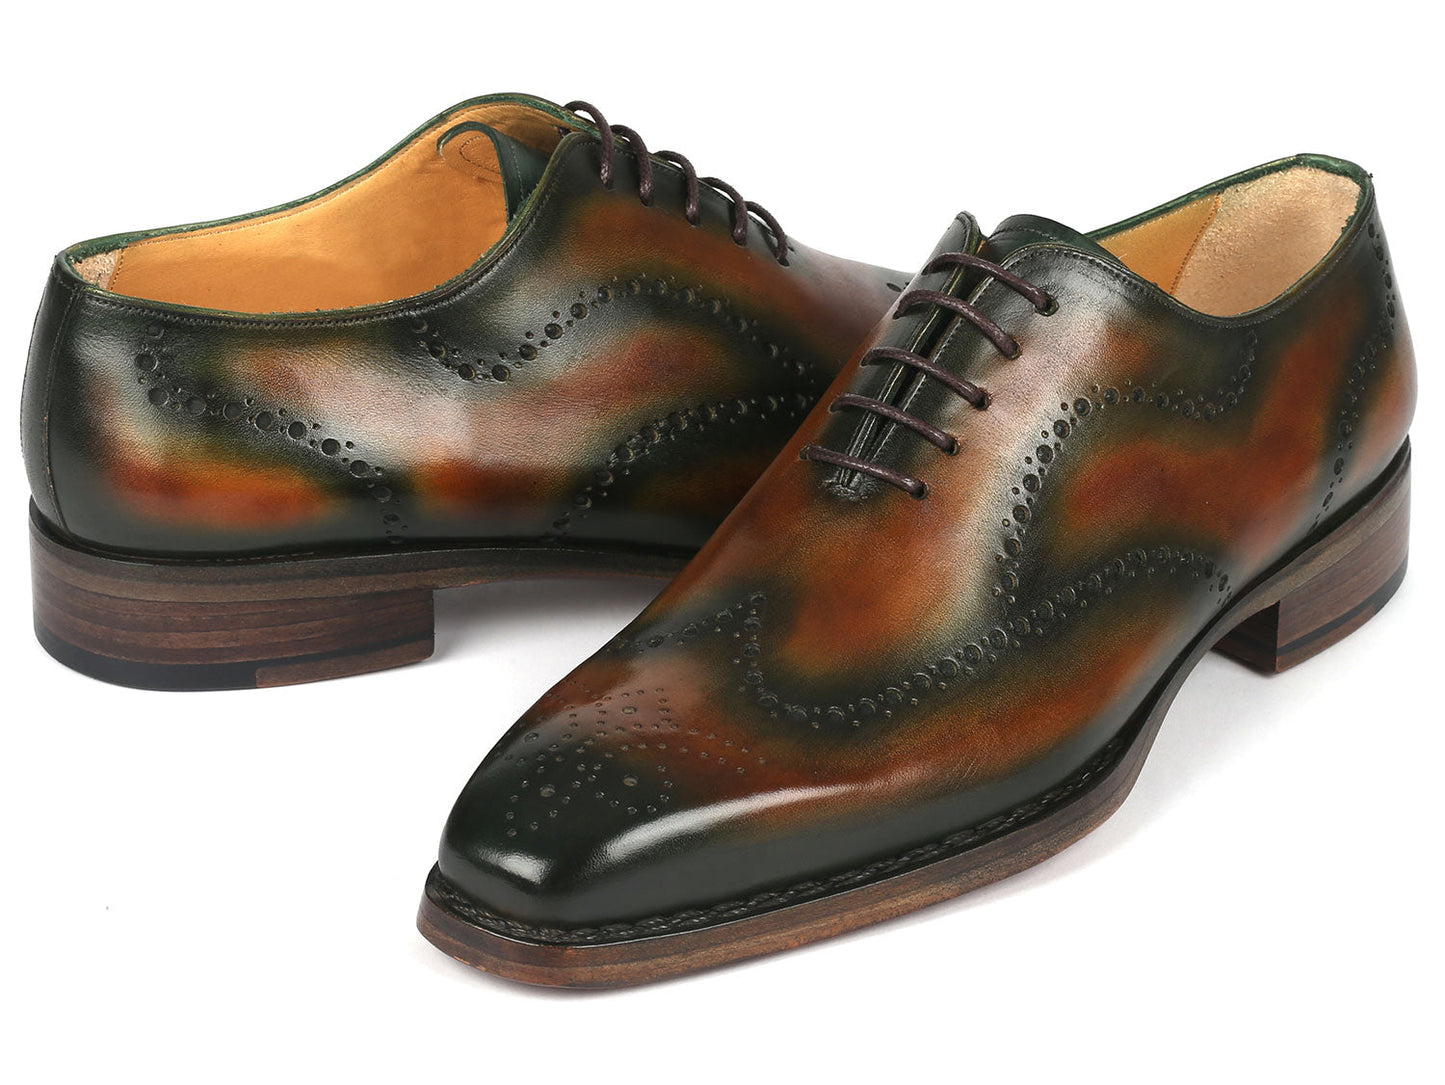 Paul Parkman Goodyear Welted Men's Brown & Green Oxford Shoes (ID#081-036)